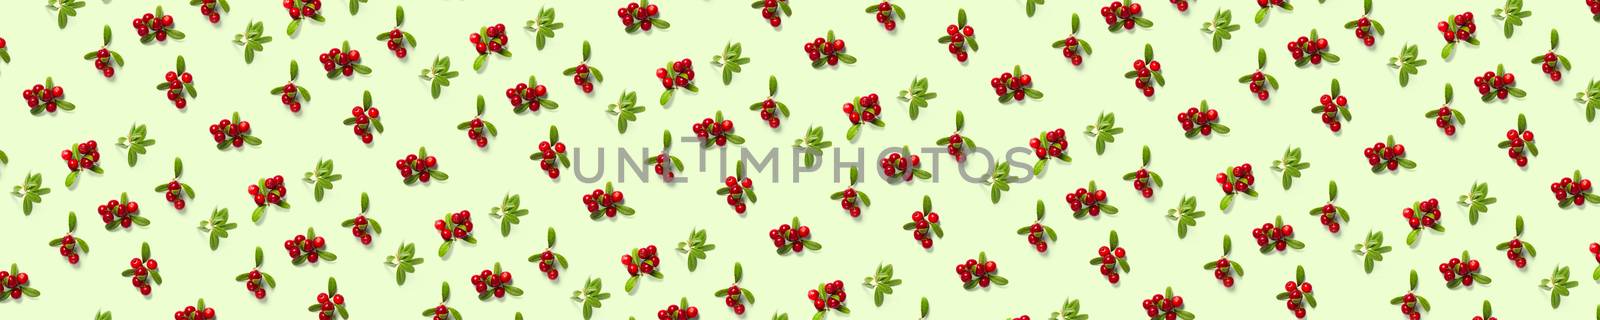 Lingonberry background on green backdrop. Fresh cowberries or cranberries with leaves as background by PhotoTime